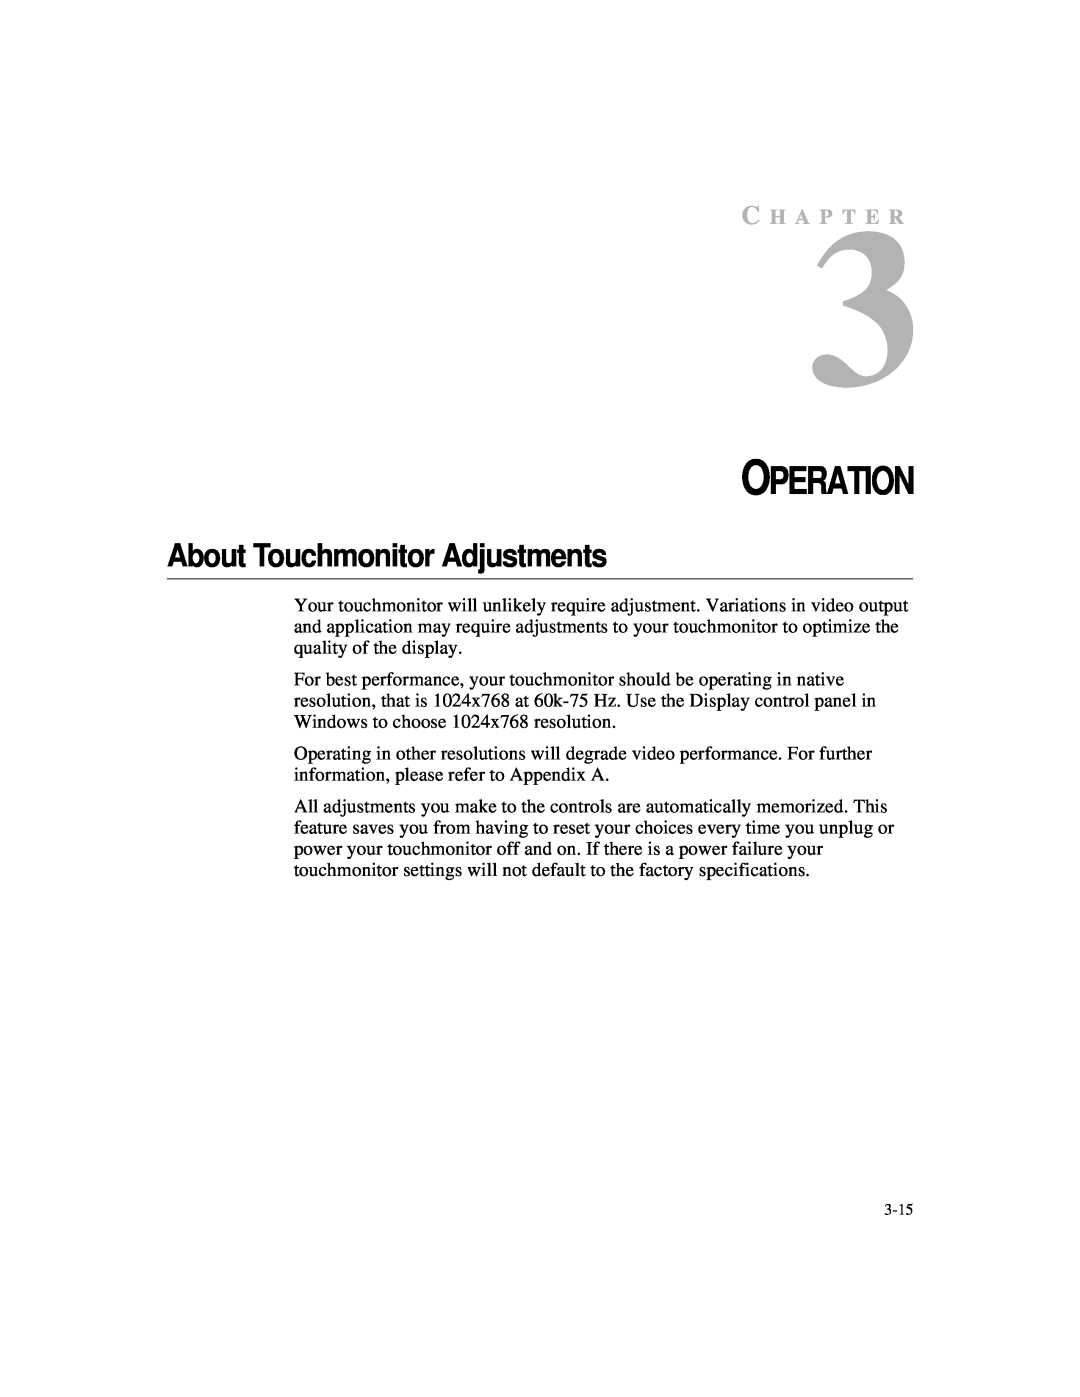 Elo TouchSystems 1524L manual Operation, About Touchmonitor Adjustments, C H A P T E R 